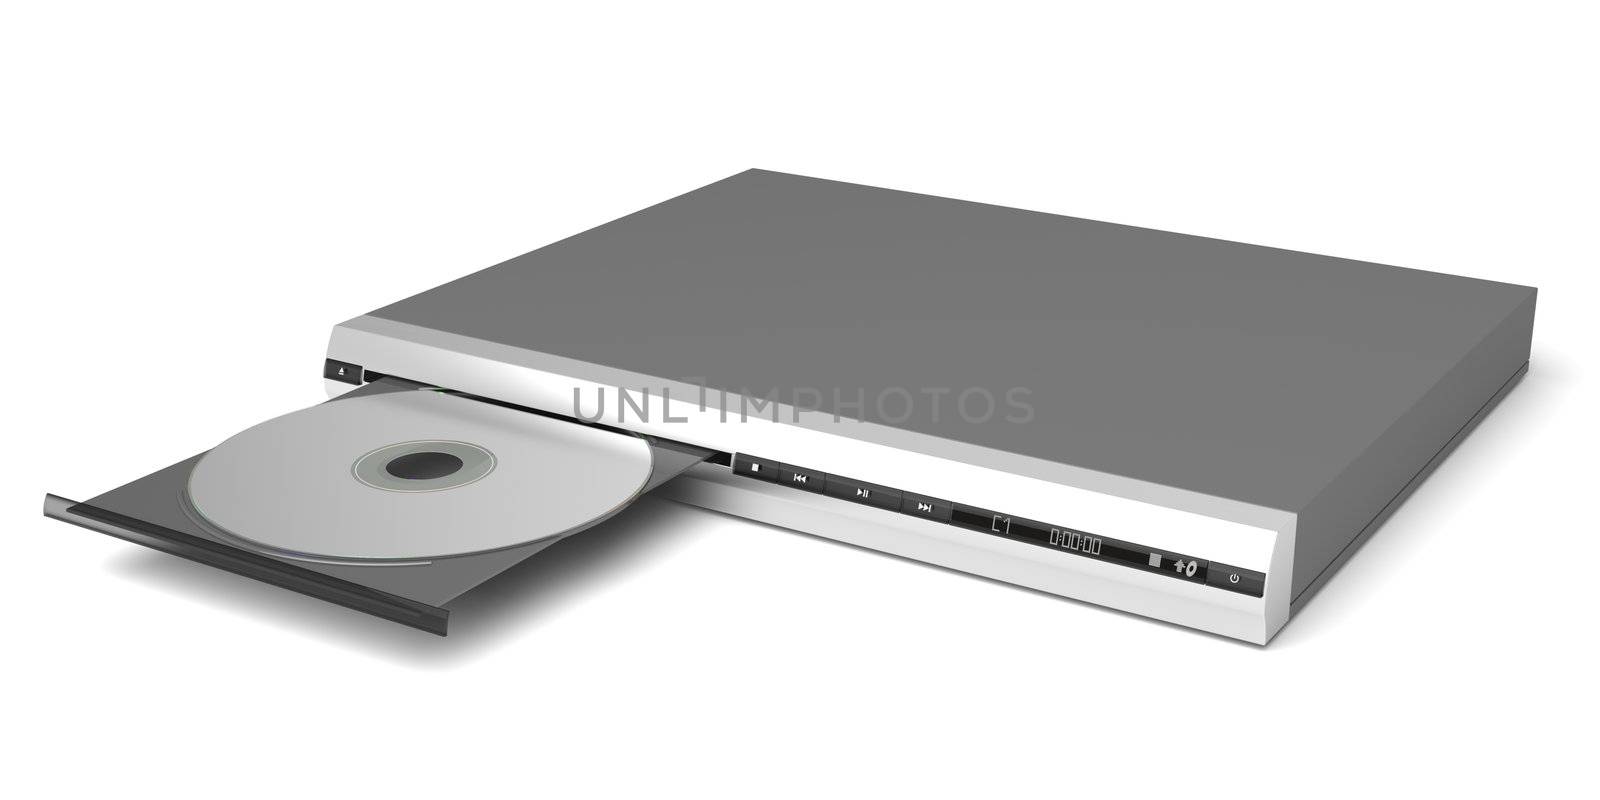 DVD player by magraphics